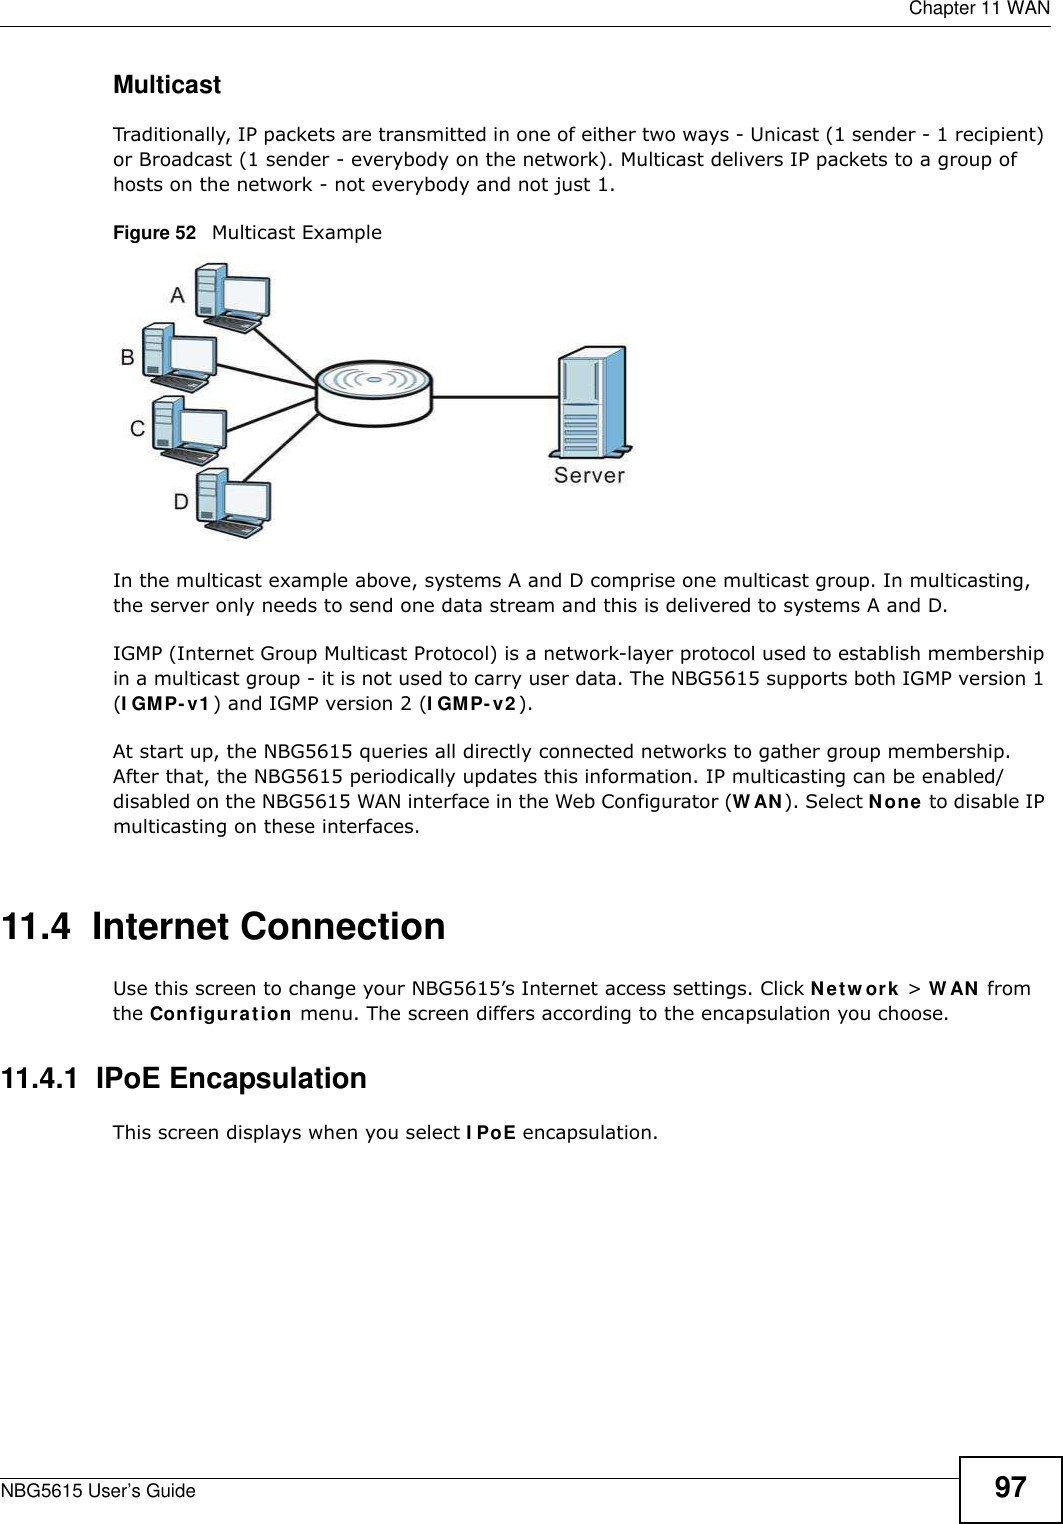  Chapter 11 WANNBG5615 User’s Guide 97MulticastTraditionally, IP packets are transmitted in one of either two ways - Unicast (1 sender - 1 recipient) or Broadcast (1 sender - everybody on the network). Multicast delivers IP packets to a group of hosts on the network - not everybody and not just 1. Figure 52   Multicast ExampleIn the multicast example above, systems A and D comprise one multicast group. In multicasting, the server only needs to send one data stream and this is delivered to systems A and D. IGMP (Internet Group Multicast Protocol) is a network-layer protocol used to establish membership in a multicast group - it is not used to carry user data. The NBG5615 supports both IGMP version 1 (I GMP-v1) and IGMP version 2 (I GMP- v2). At start up, the NBG5615 queries all directly connected networks to gather group membership. After that, the NBG5615 periodically updates this information. IP multicasting can be enabled/disabled on the NBG5615 WAN interface in the Web Configurator (W AN). Select None to disable IP multicasting on these interfaces.11.4  Internet ConnectionUse this screen to change your NBG5615’s Internet access settings. Click Netw ork &gt; W AN from the Configuration menu. The screen differs according to the encapsulation you choose.11.4.1  IPoE EncapsulationThis screen displays when you select I PoE encapsulation.